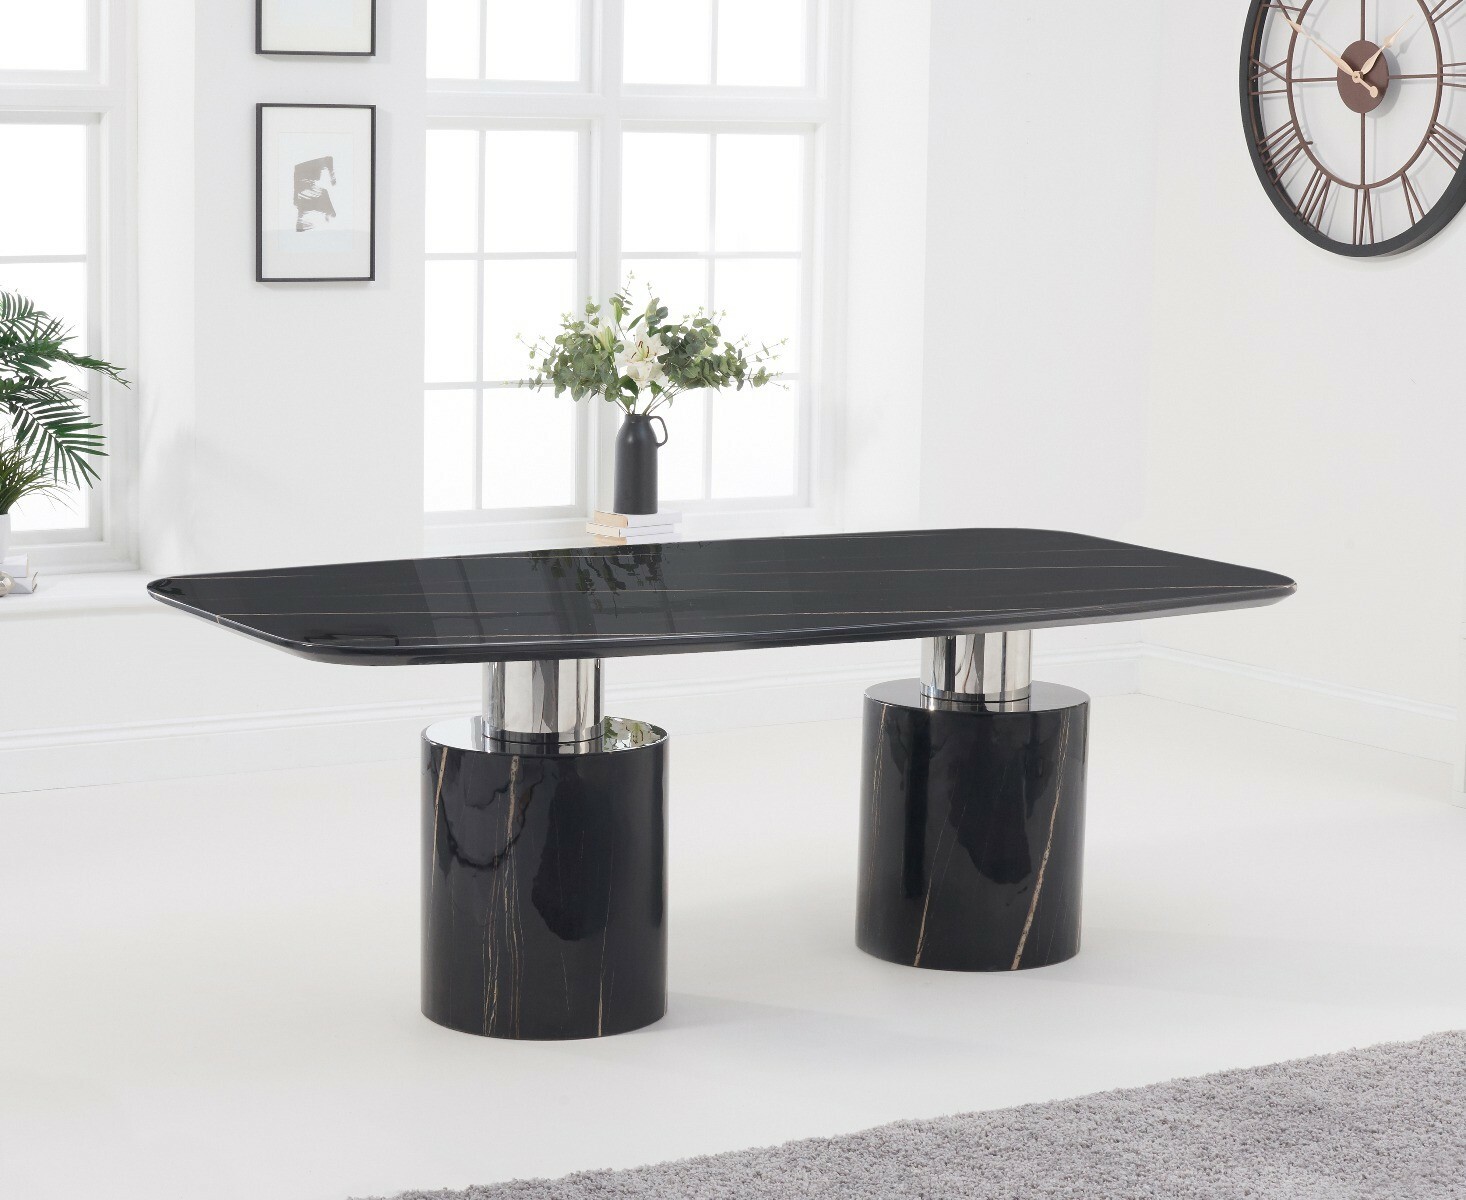 Photo 4 of Antonio 180cm black marble dining table with 8 grey francesca chairs